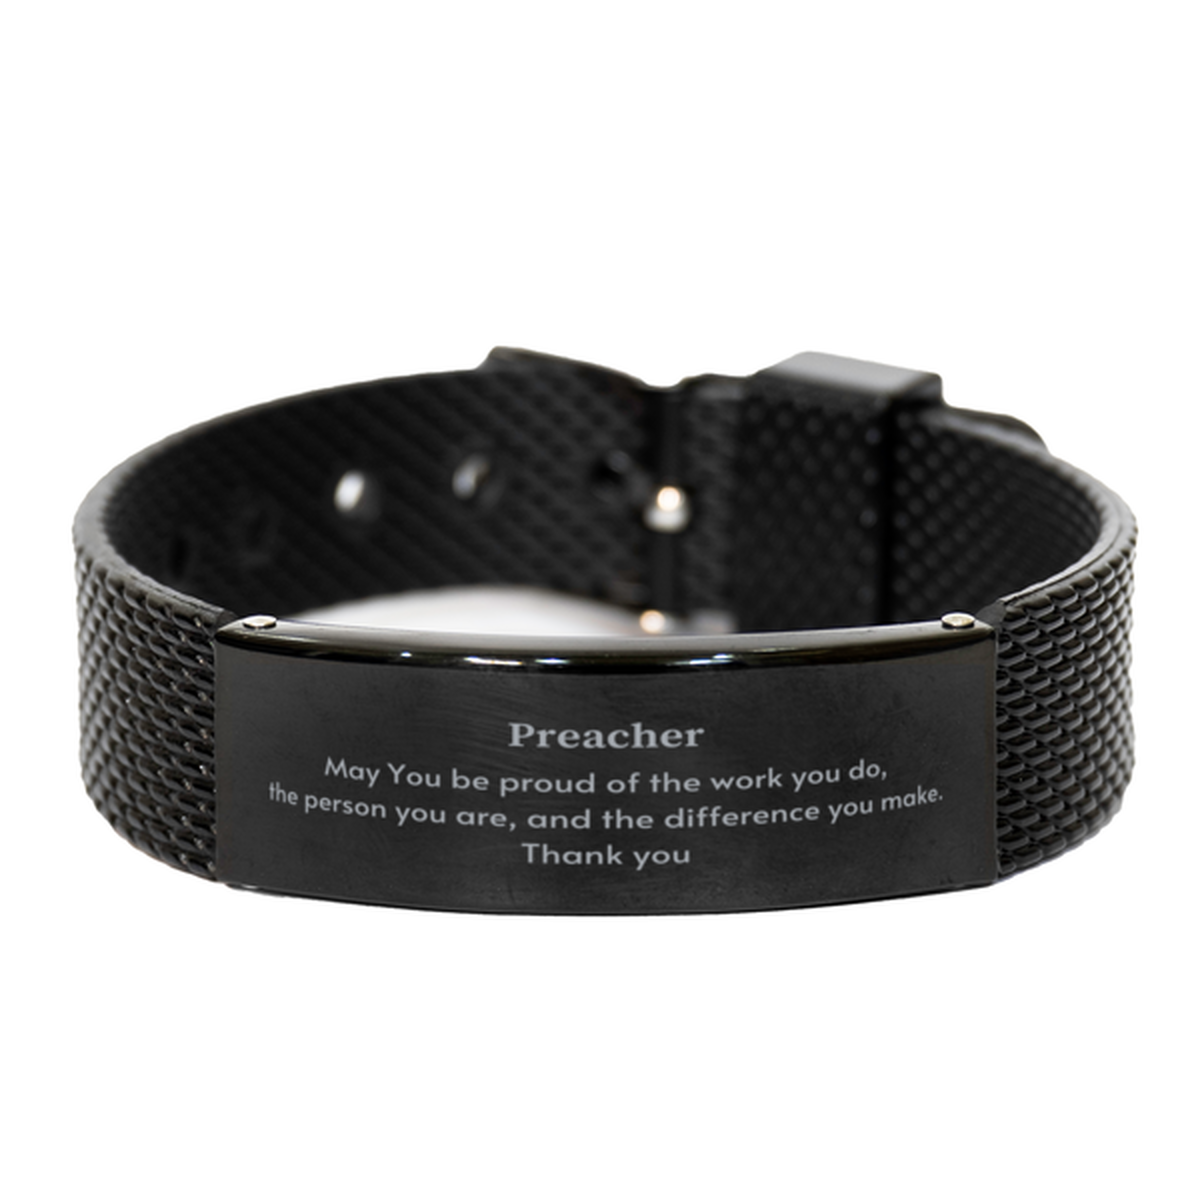 Heartwarming Black Shark Mesh Bracelet Retirement Coworkers Gifts for Preacher, Preacher May You be proud of the work you do, the person you are Gifts for Boss Men Women Friends